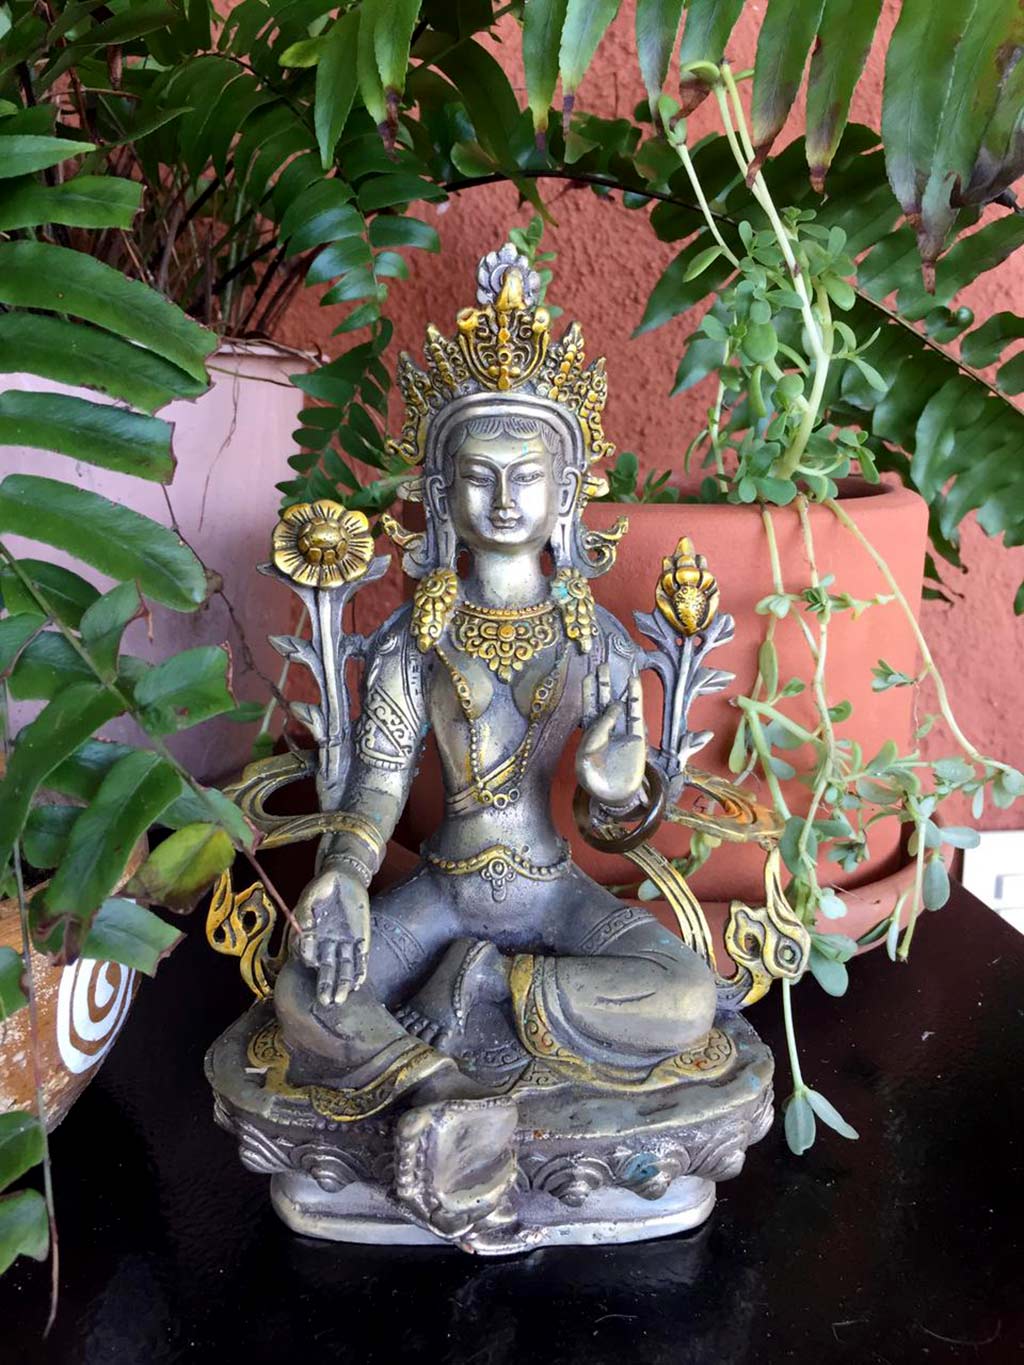 Green Tara statue, a personification of compassion worshipped in puja.